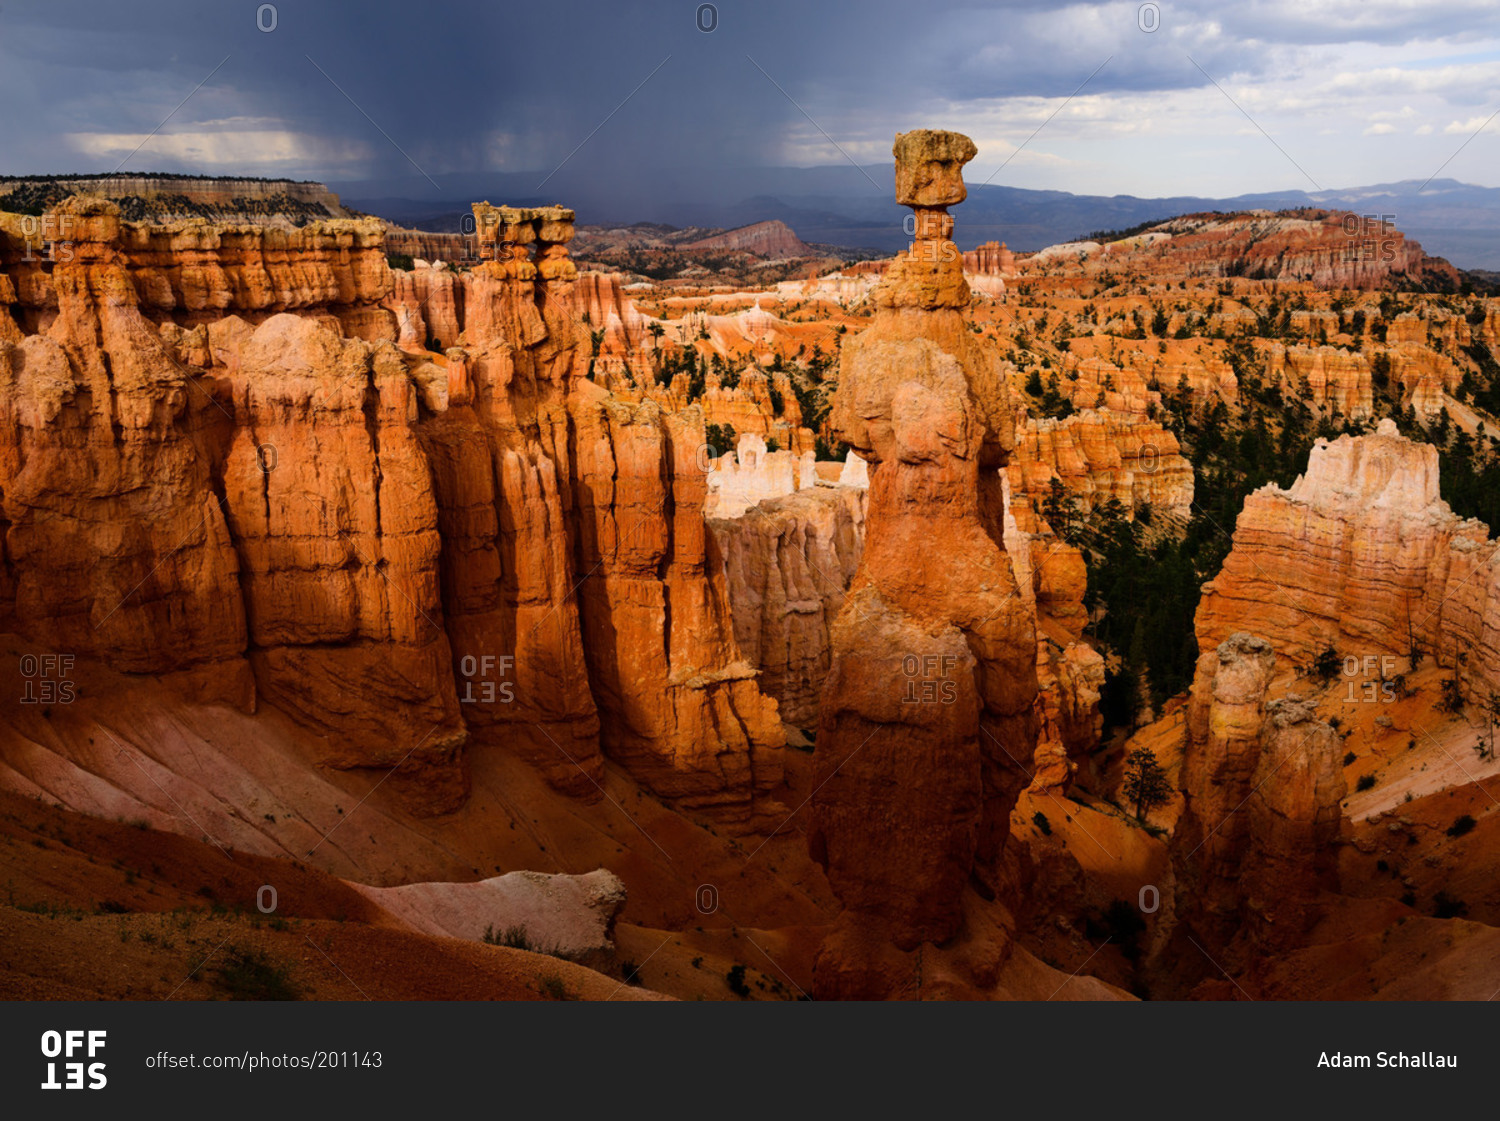 Thor's Hammer in Bryce Canyon National Park, Utah